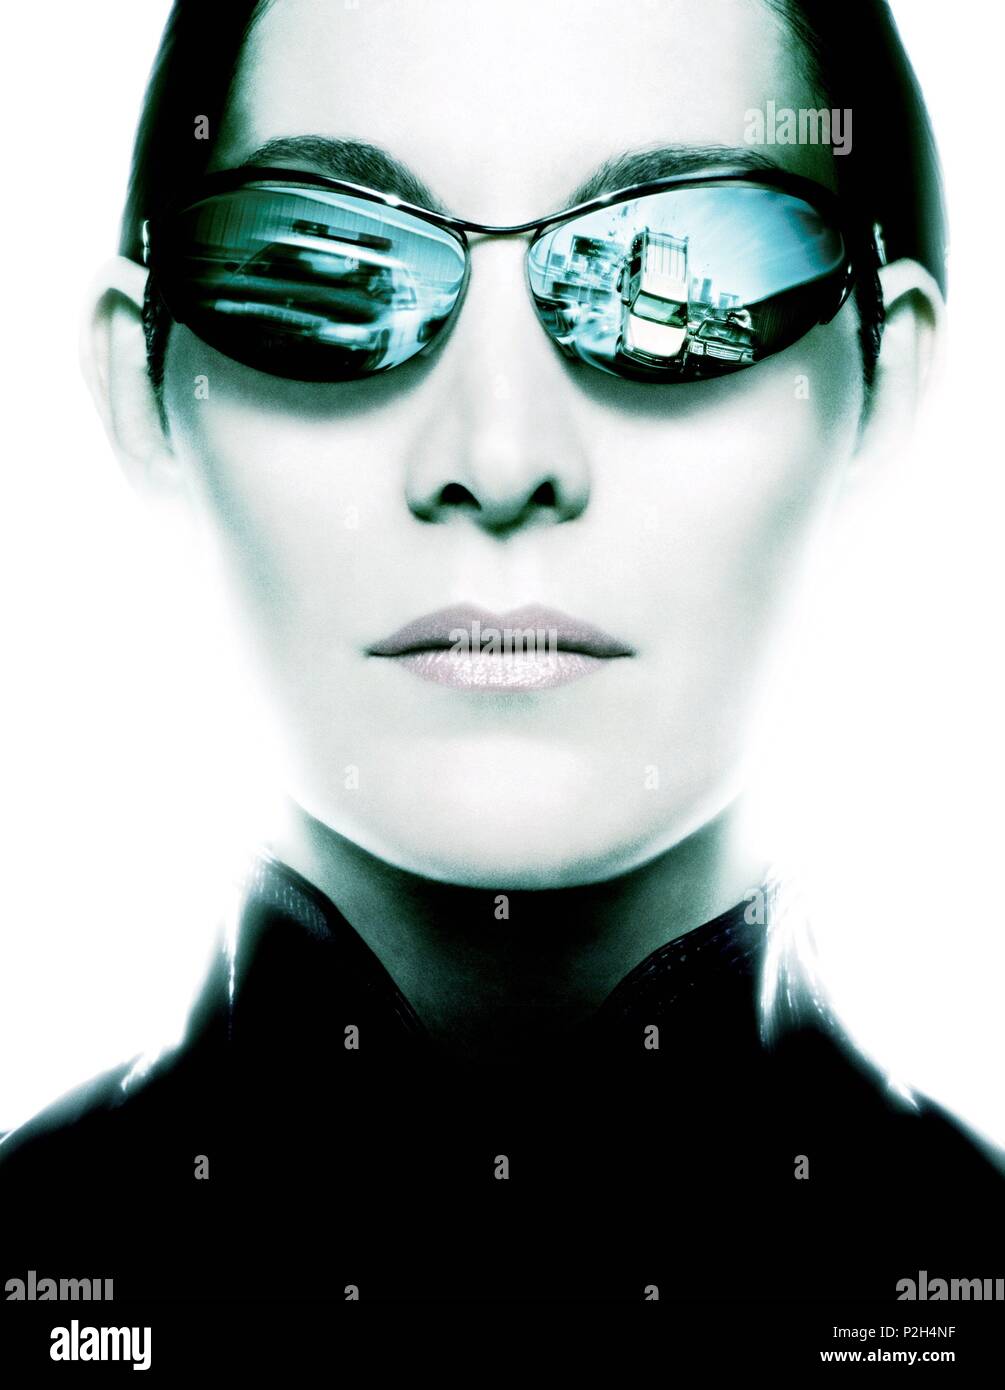 Original Film Title: MATRIX RELOADED, THE.  English Title: MATRIX RELOADED, THE.  Film Director: ANDY WACHOWSKI; LARRY WACHOWSKI.  Year: 2003.  Stars: CARRIE-ANNE MOSS. Credit: WARNER BROS. PICTURES / Album Stock Photo